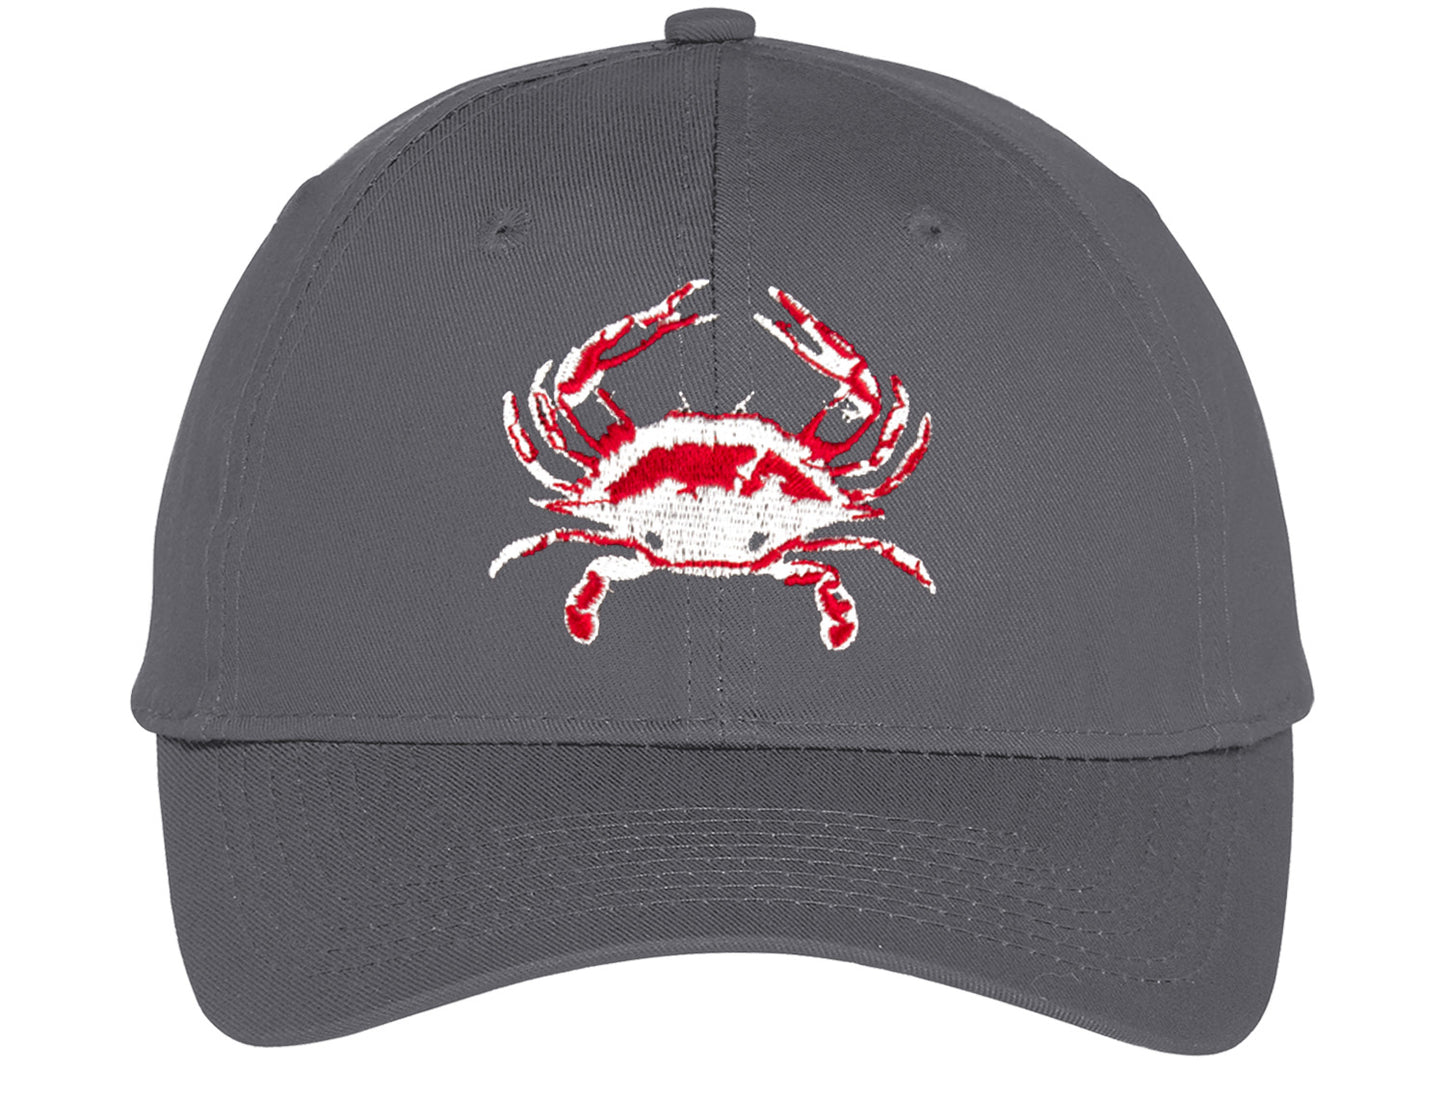 Blue Crab "Reel Crabby" Hat - Charcoal Unstructured Dad Hat